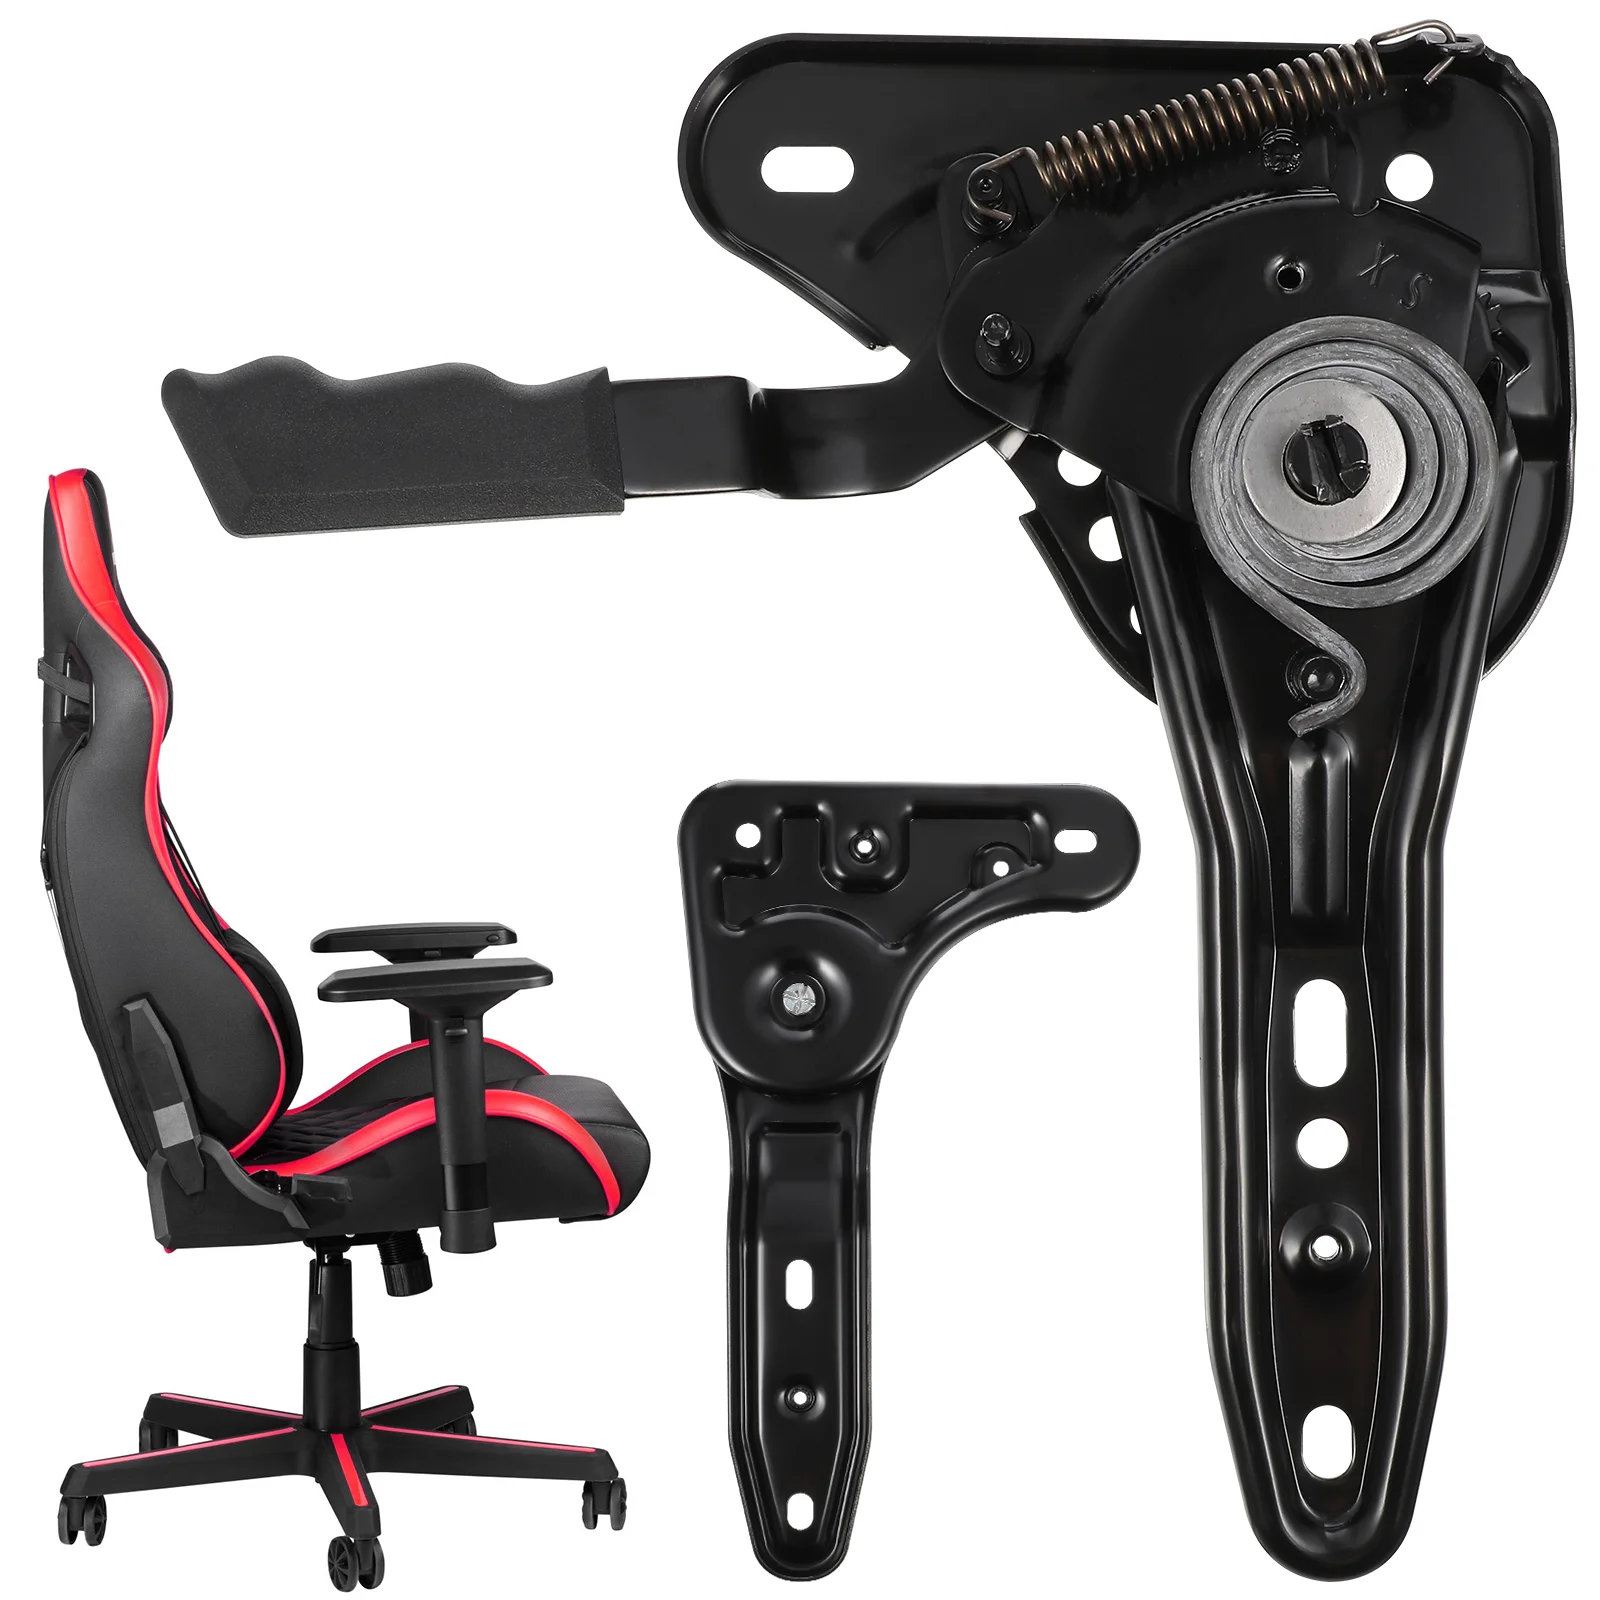 Angle Adjuster Chair Angle Adjuster Gaming Chair Tuner Angle Adjuster Tool Chair Accessory Backrest Tilt adjustment mechanism angledcurved foot intake pipe angle adjustment angled curved foot eccentric screw extended corner angle shower faucet accessory